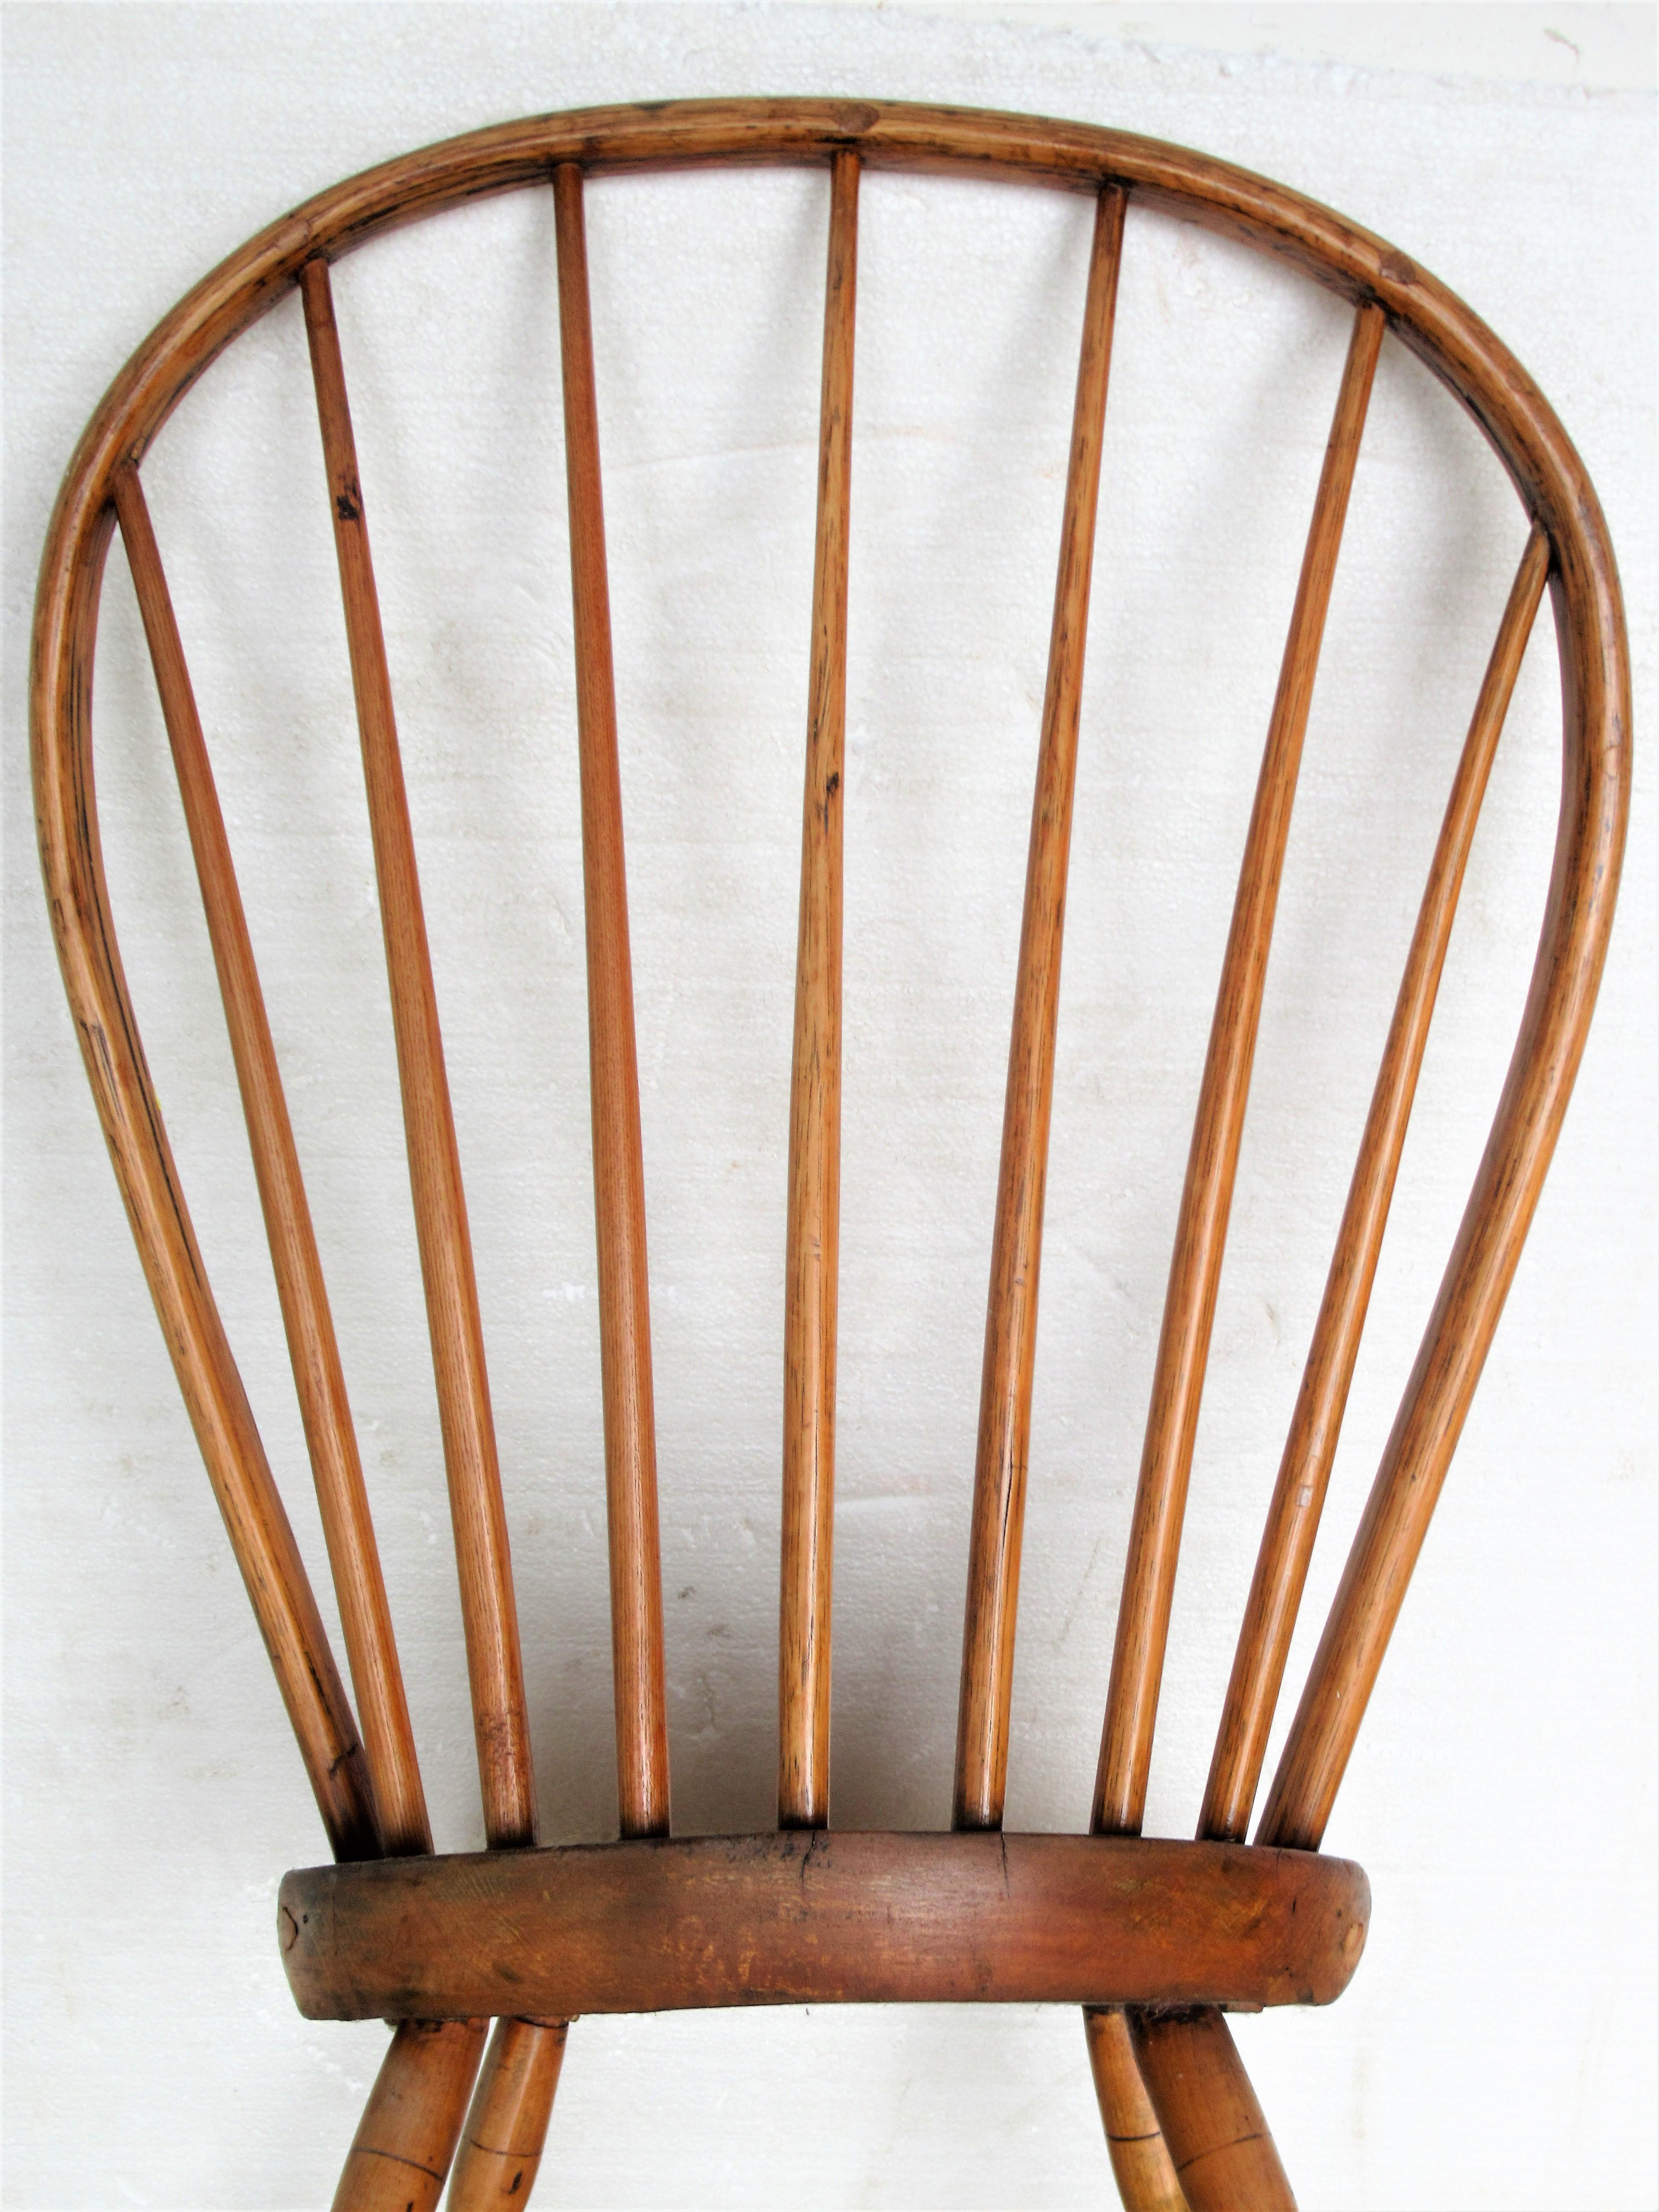 Antique Bow-Back Windsor Chair 1